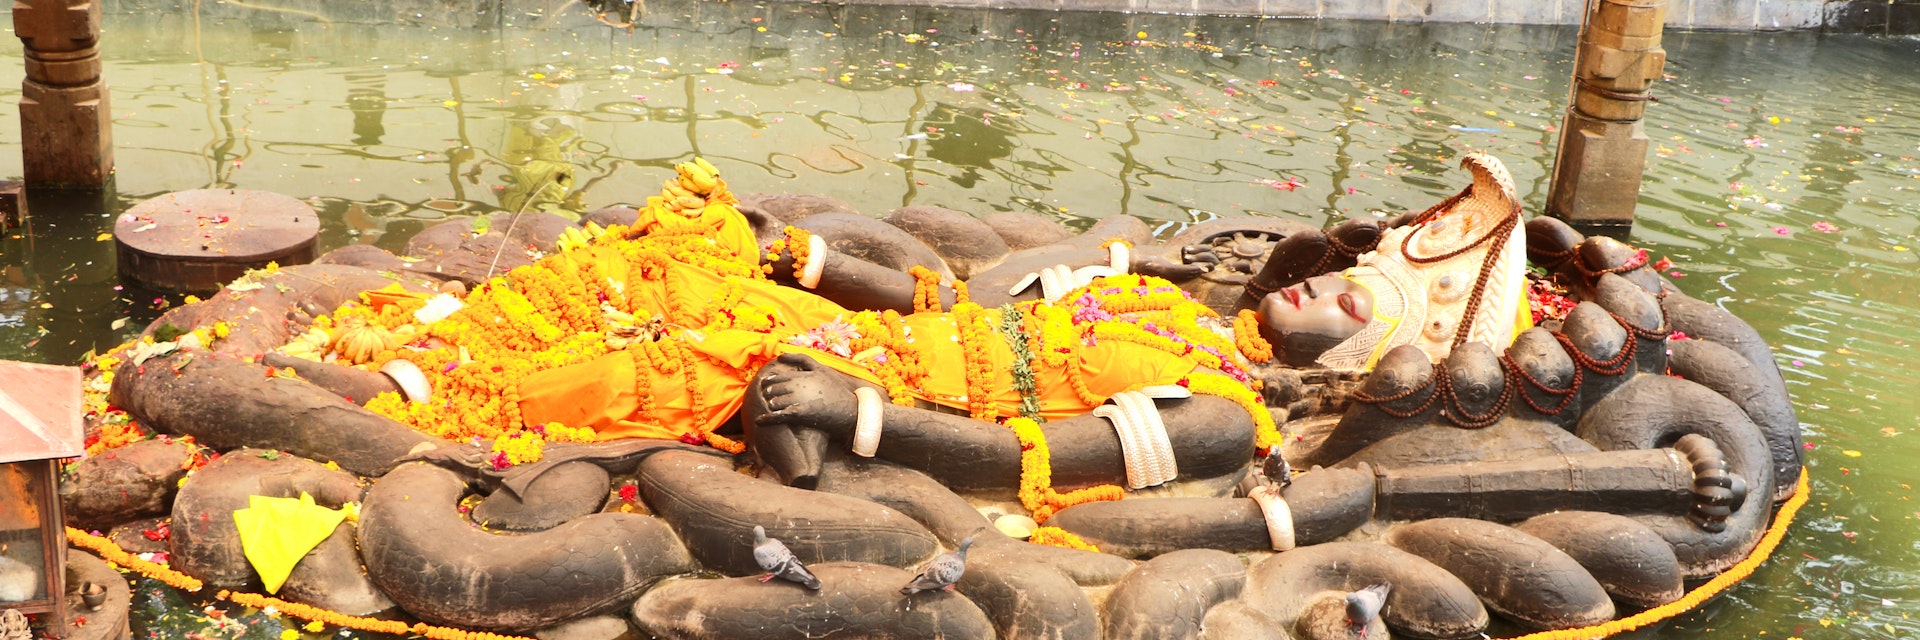 The Budhanilkantha statue of the Hindu god Vishnu, lies in a reclining position inside a recessed tank of water.